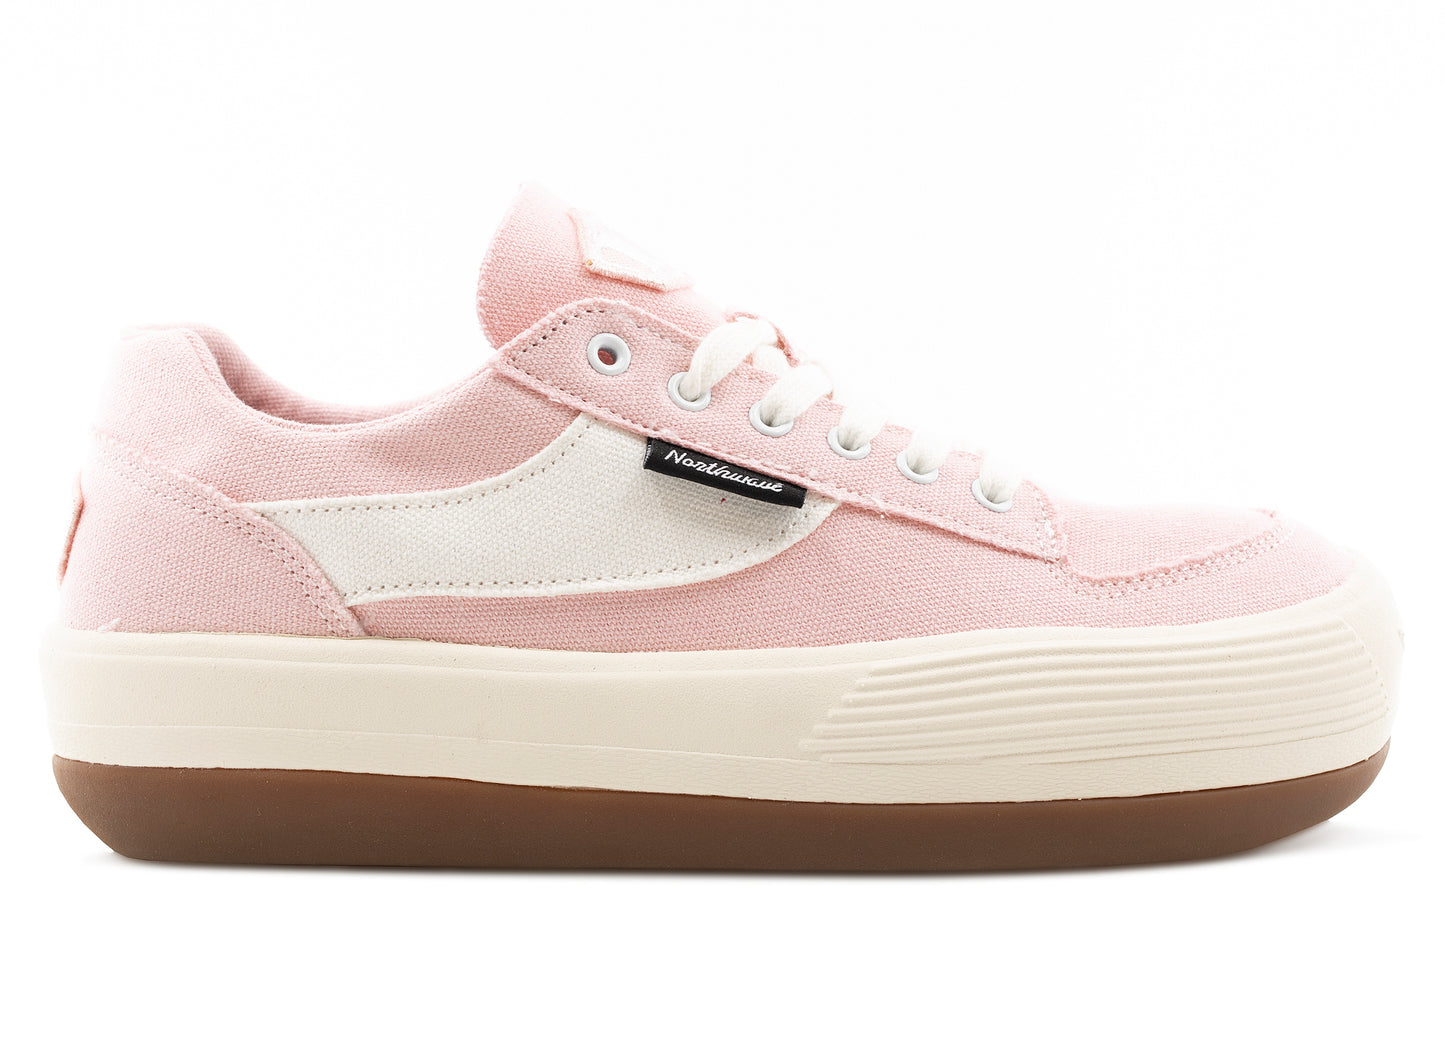 Northwave Expresso Canvas Low Sneakers in Pink